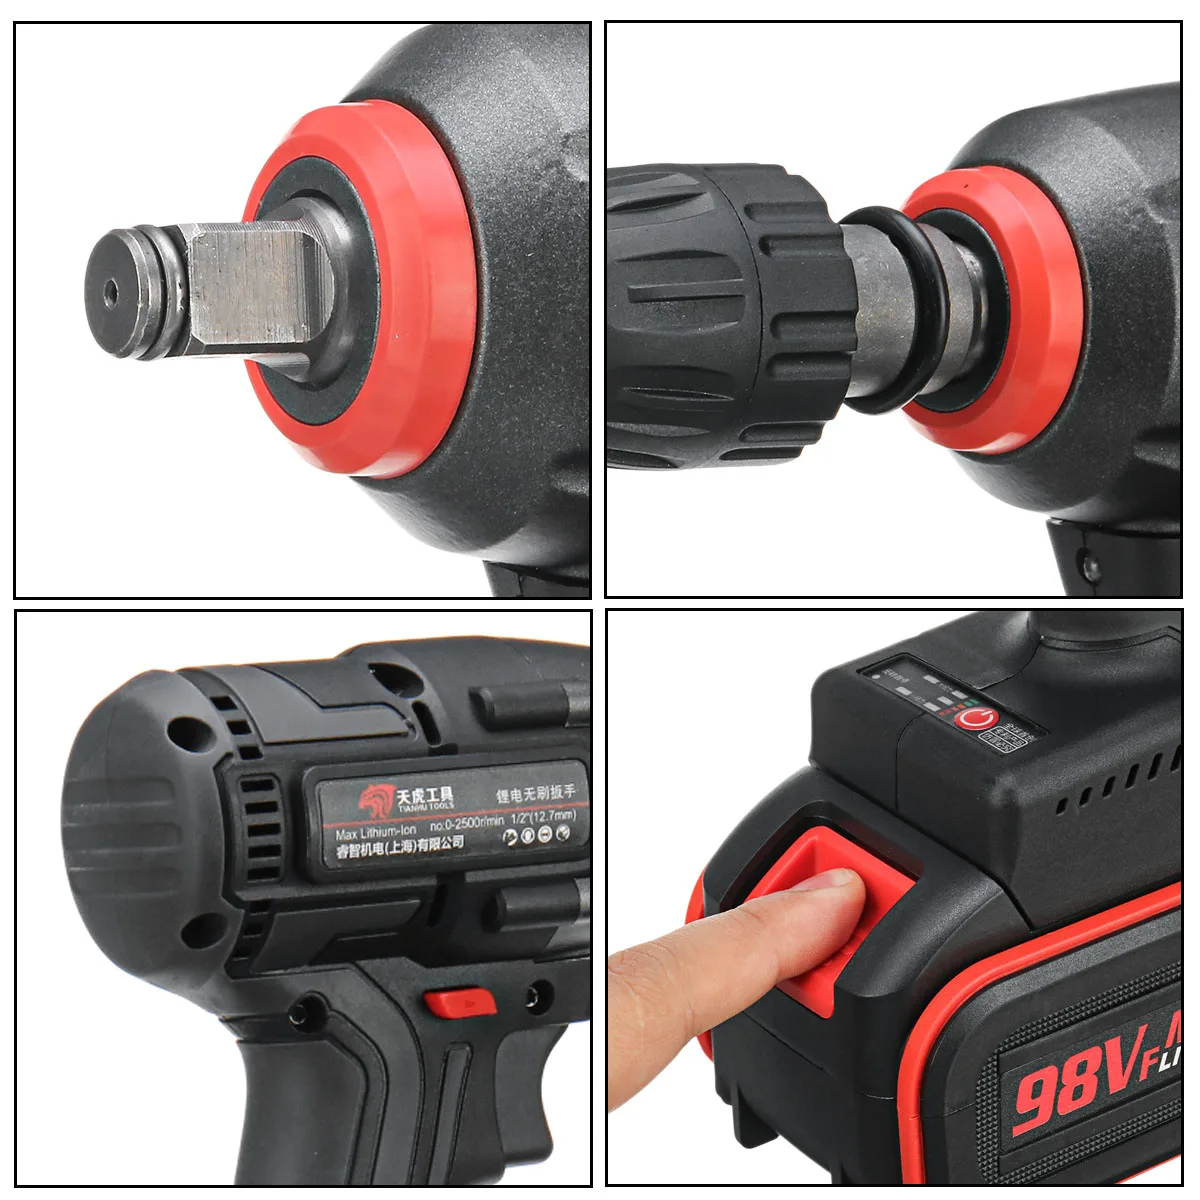 1Set 98V 16800mAh Cordless High Torque Lithium-Ion Brushless motor Electric Impact Wrench 360 N.m Torque 2500r/min